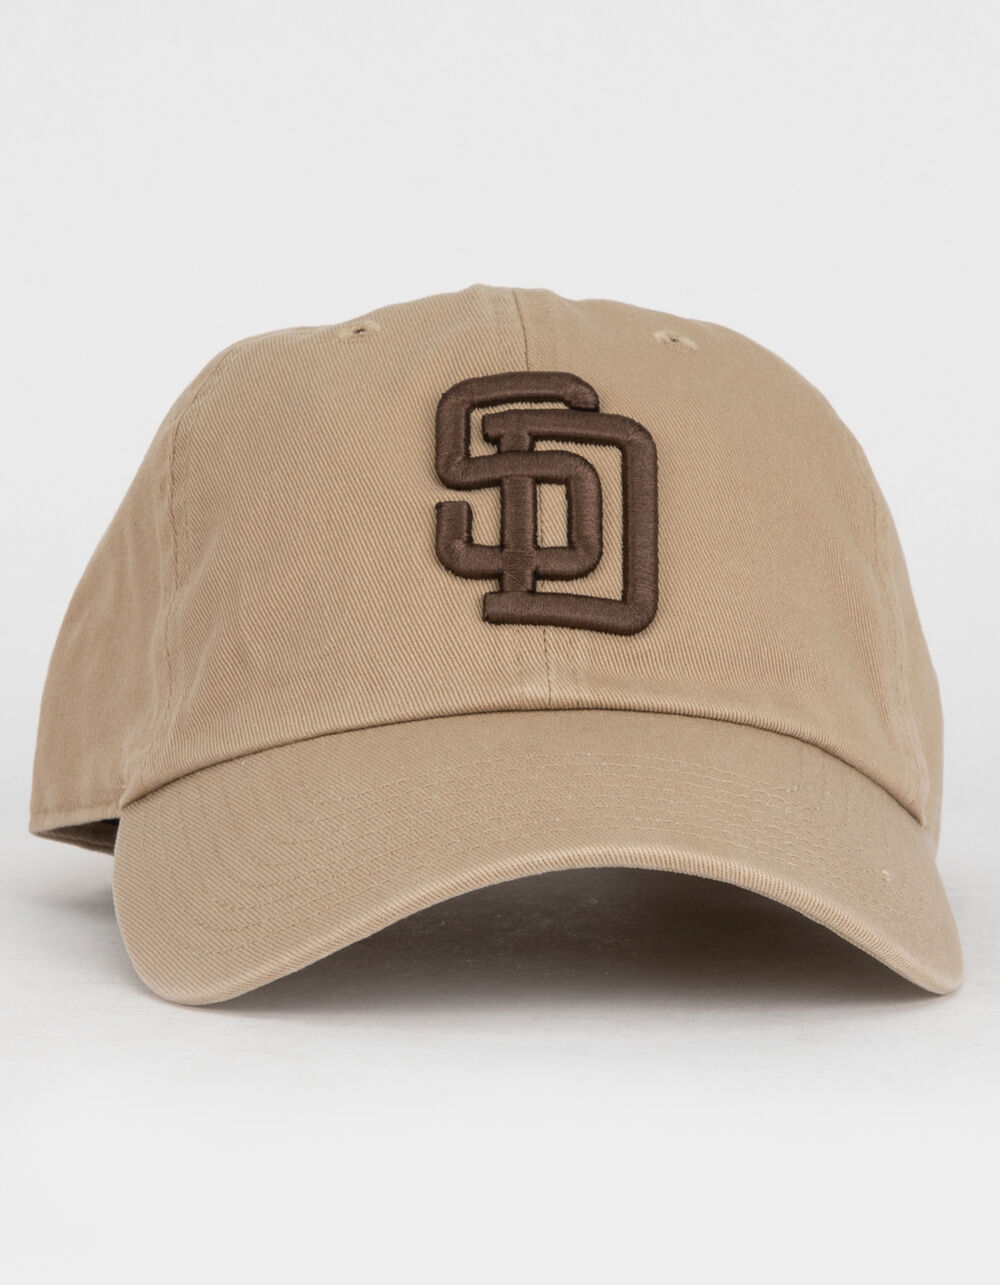 San Diego Padres 25th Anniversary Cooperstown New Era 59FIFTY Fitted MLB Cap   TAASScom Fan Shop